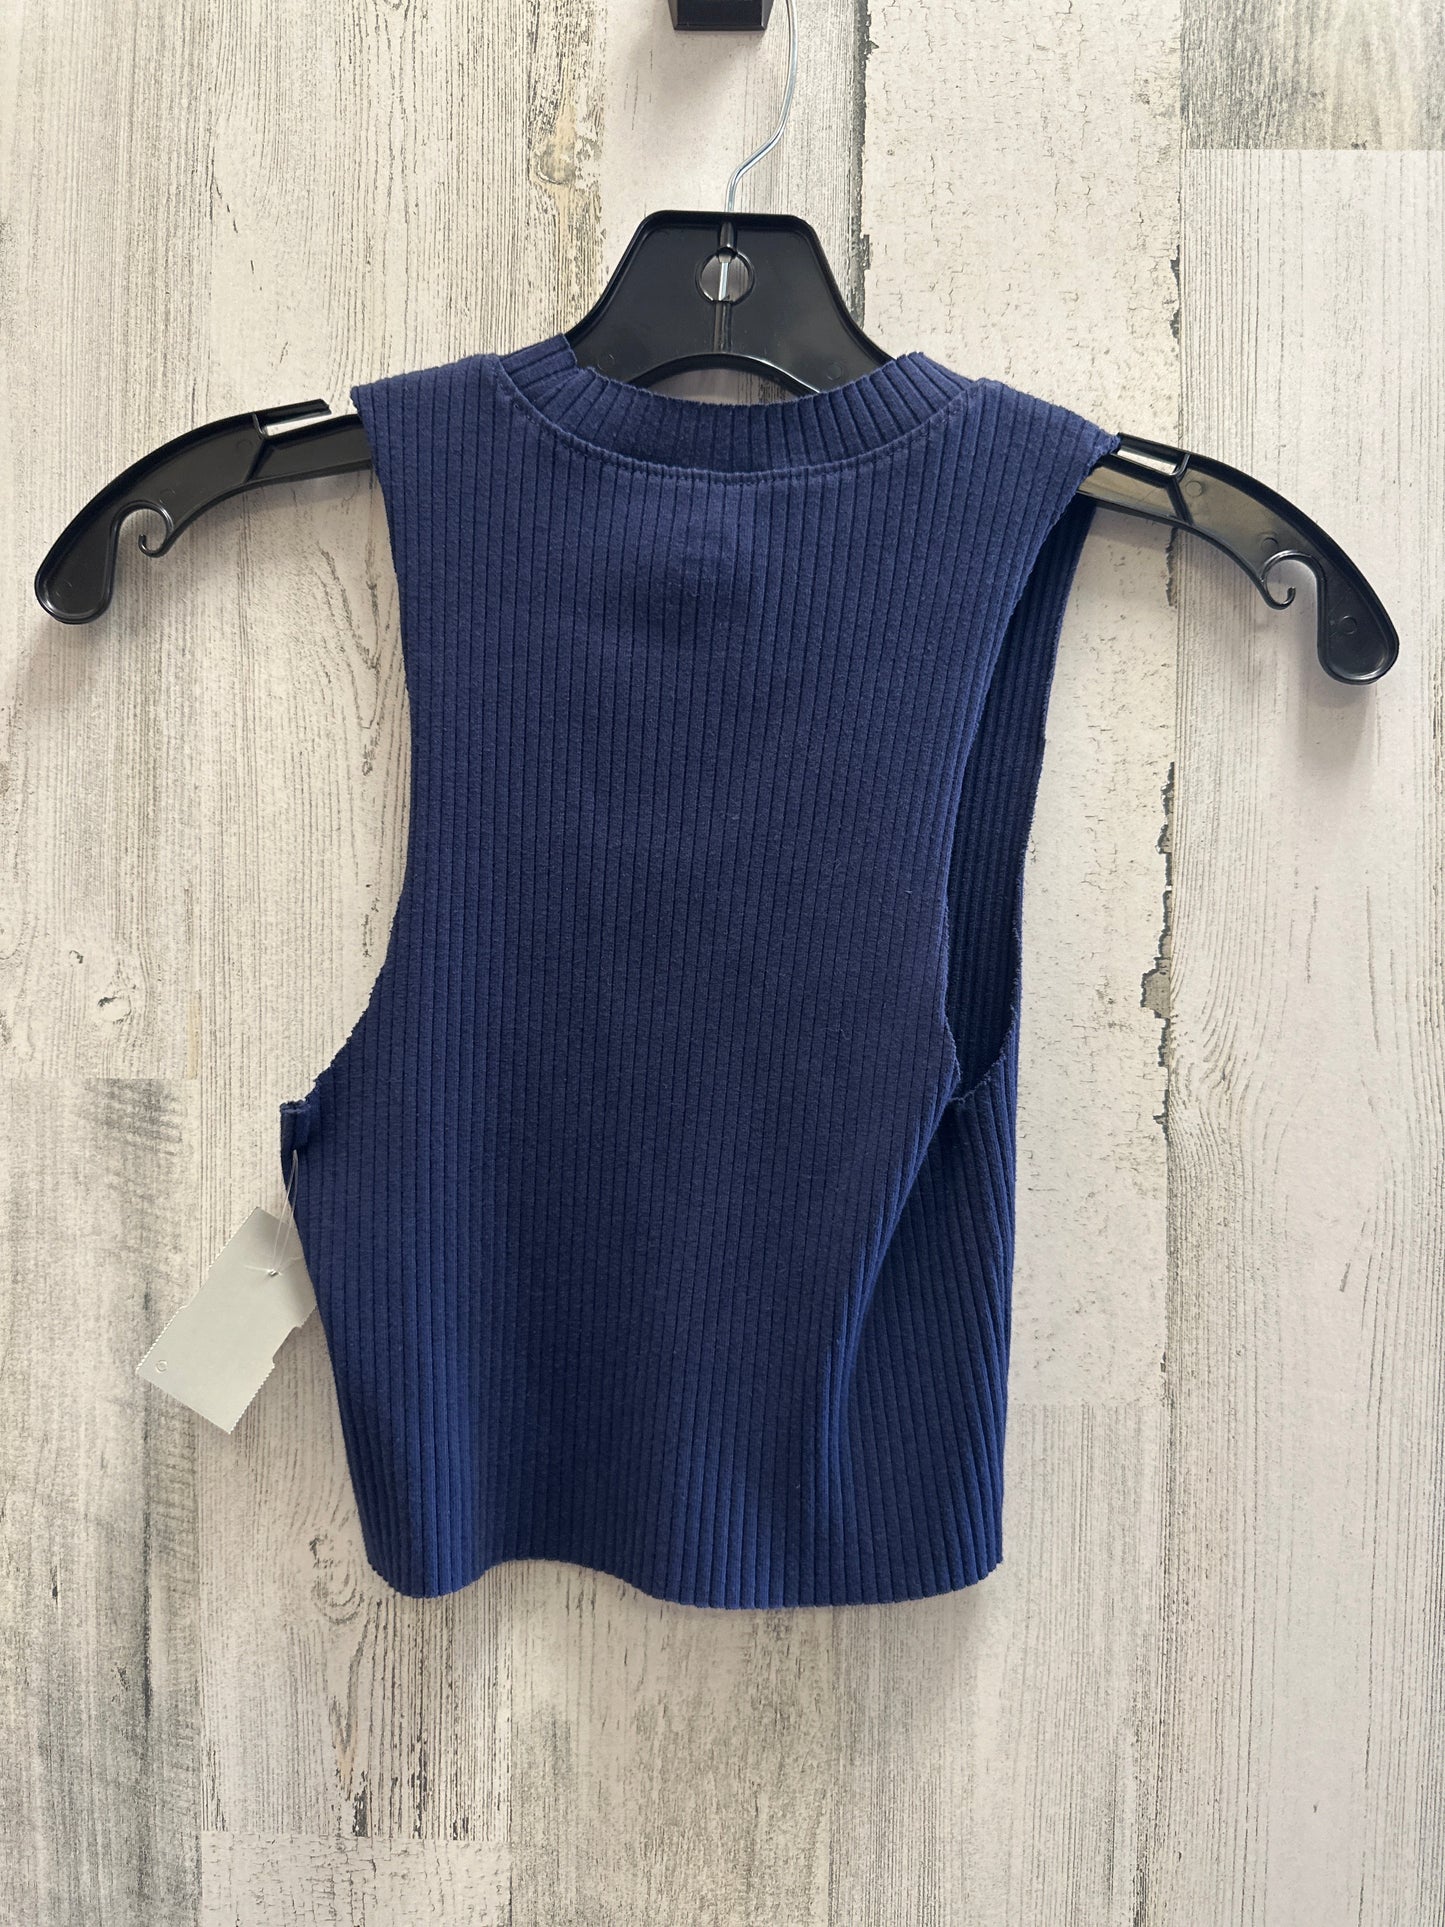 Blue Top Sleeveless Aerie, Size Xs